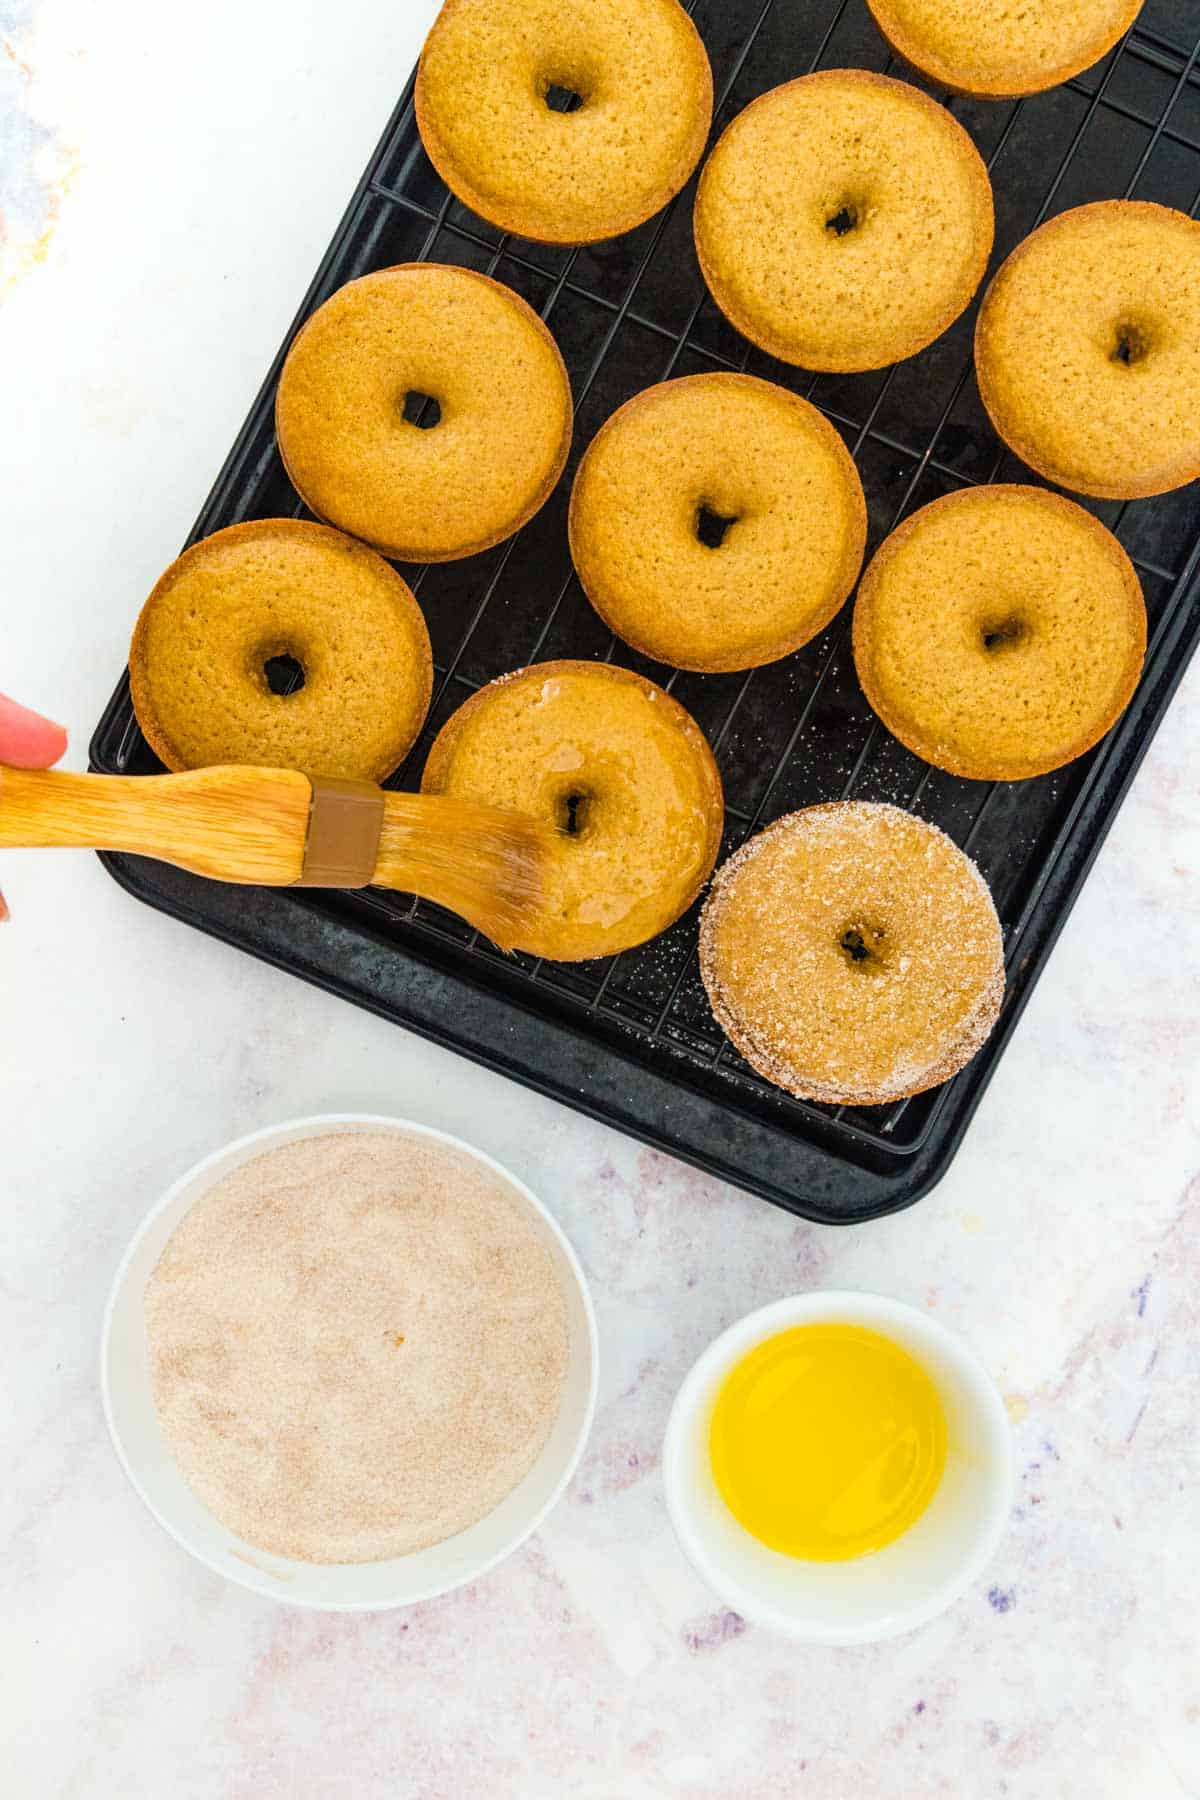 Gluten free apple cider donuts on a baking tray are brushed with melted butter, next to a small bowl of cinnamon sugar.